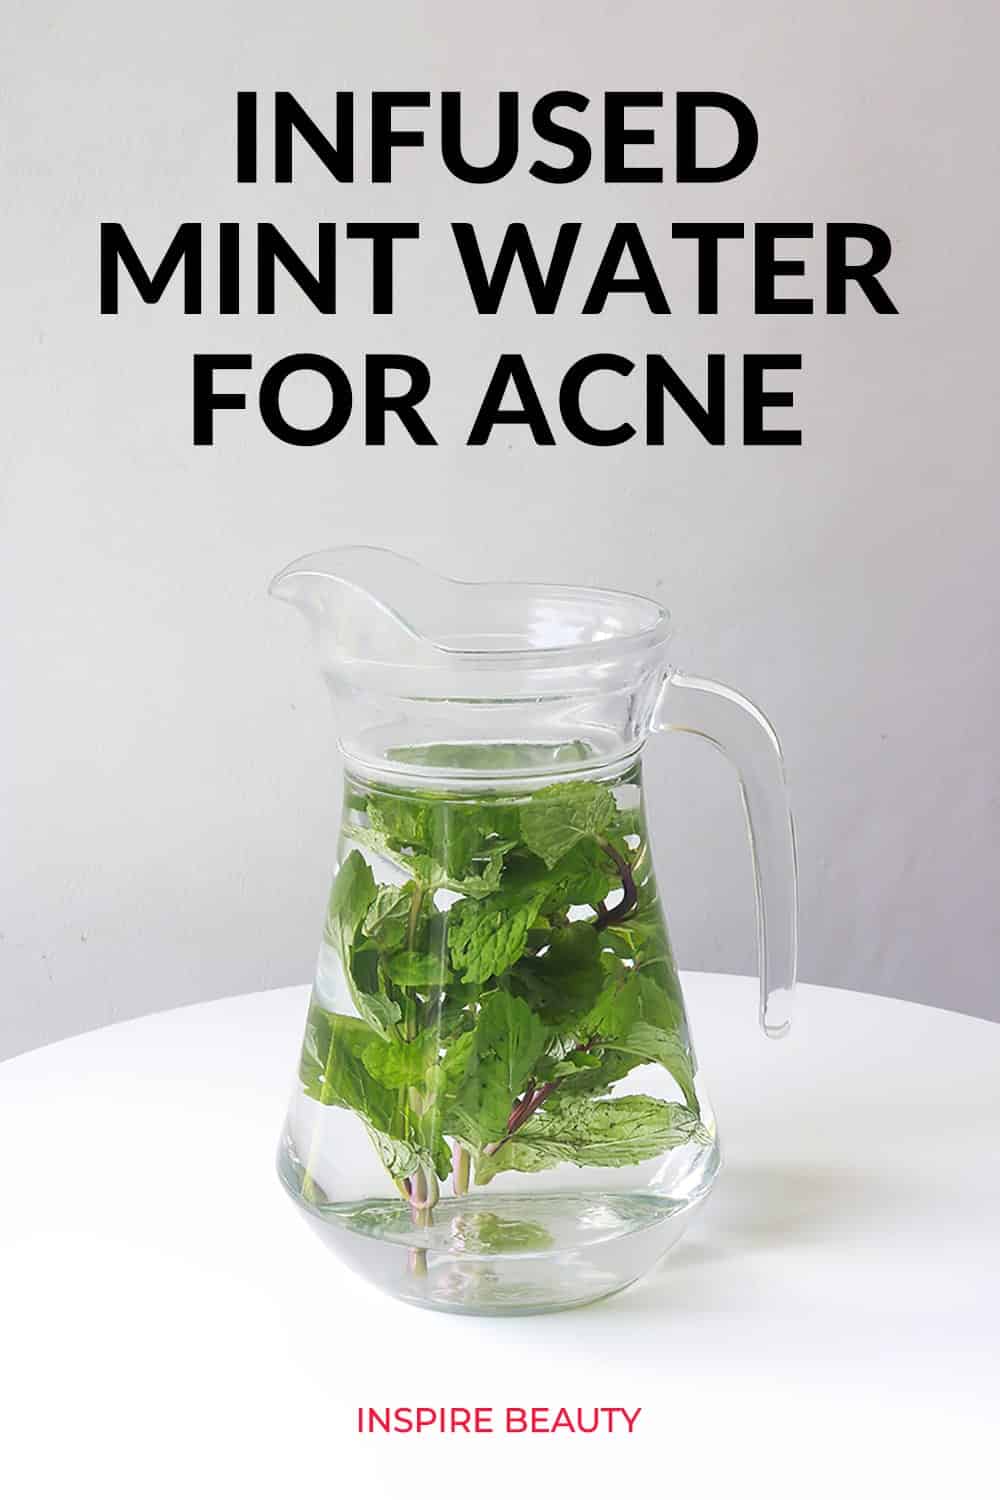 Drinking infused mint water can help clear up hormone related acne and breakouts